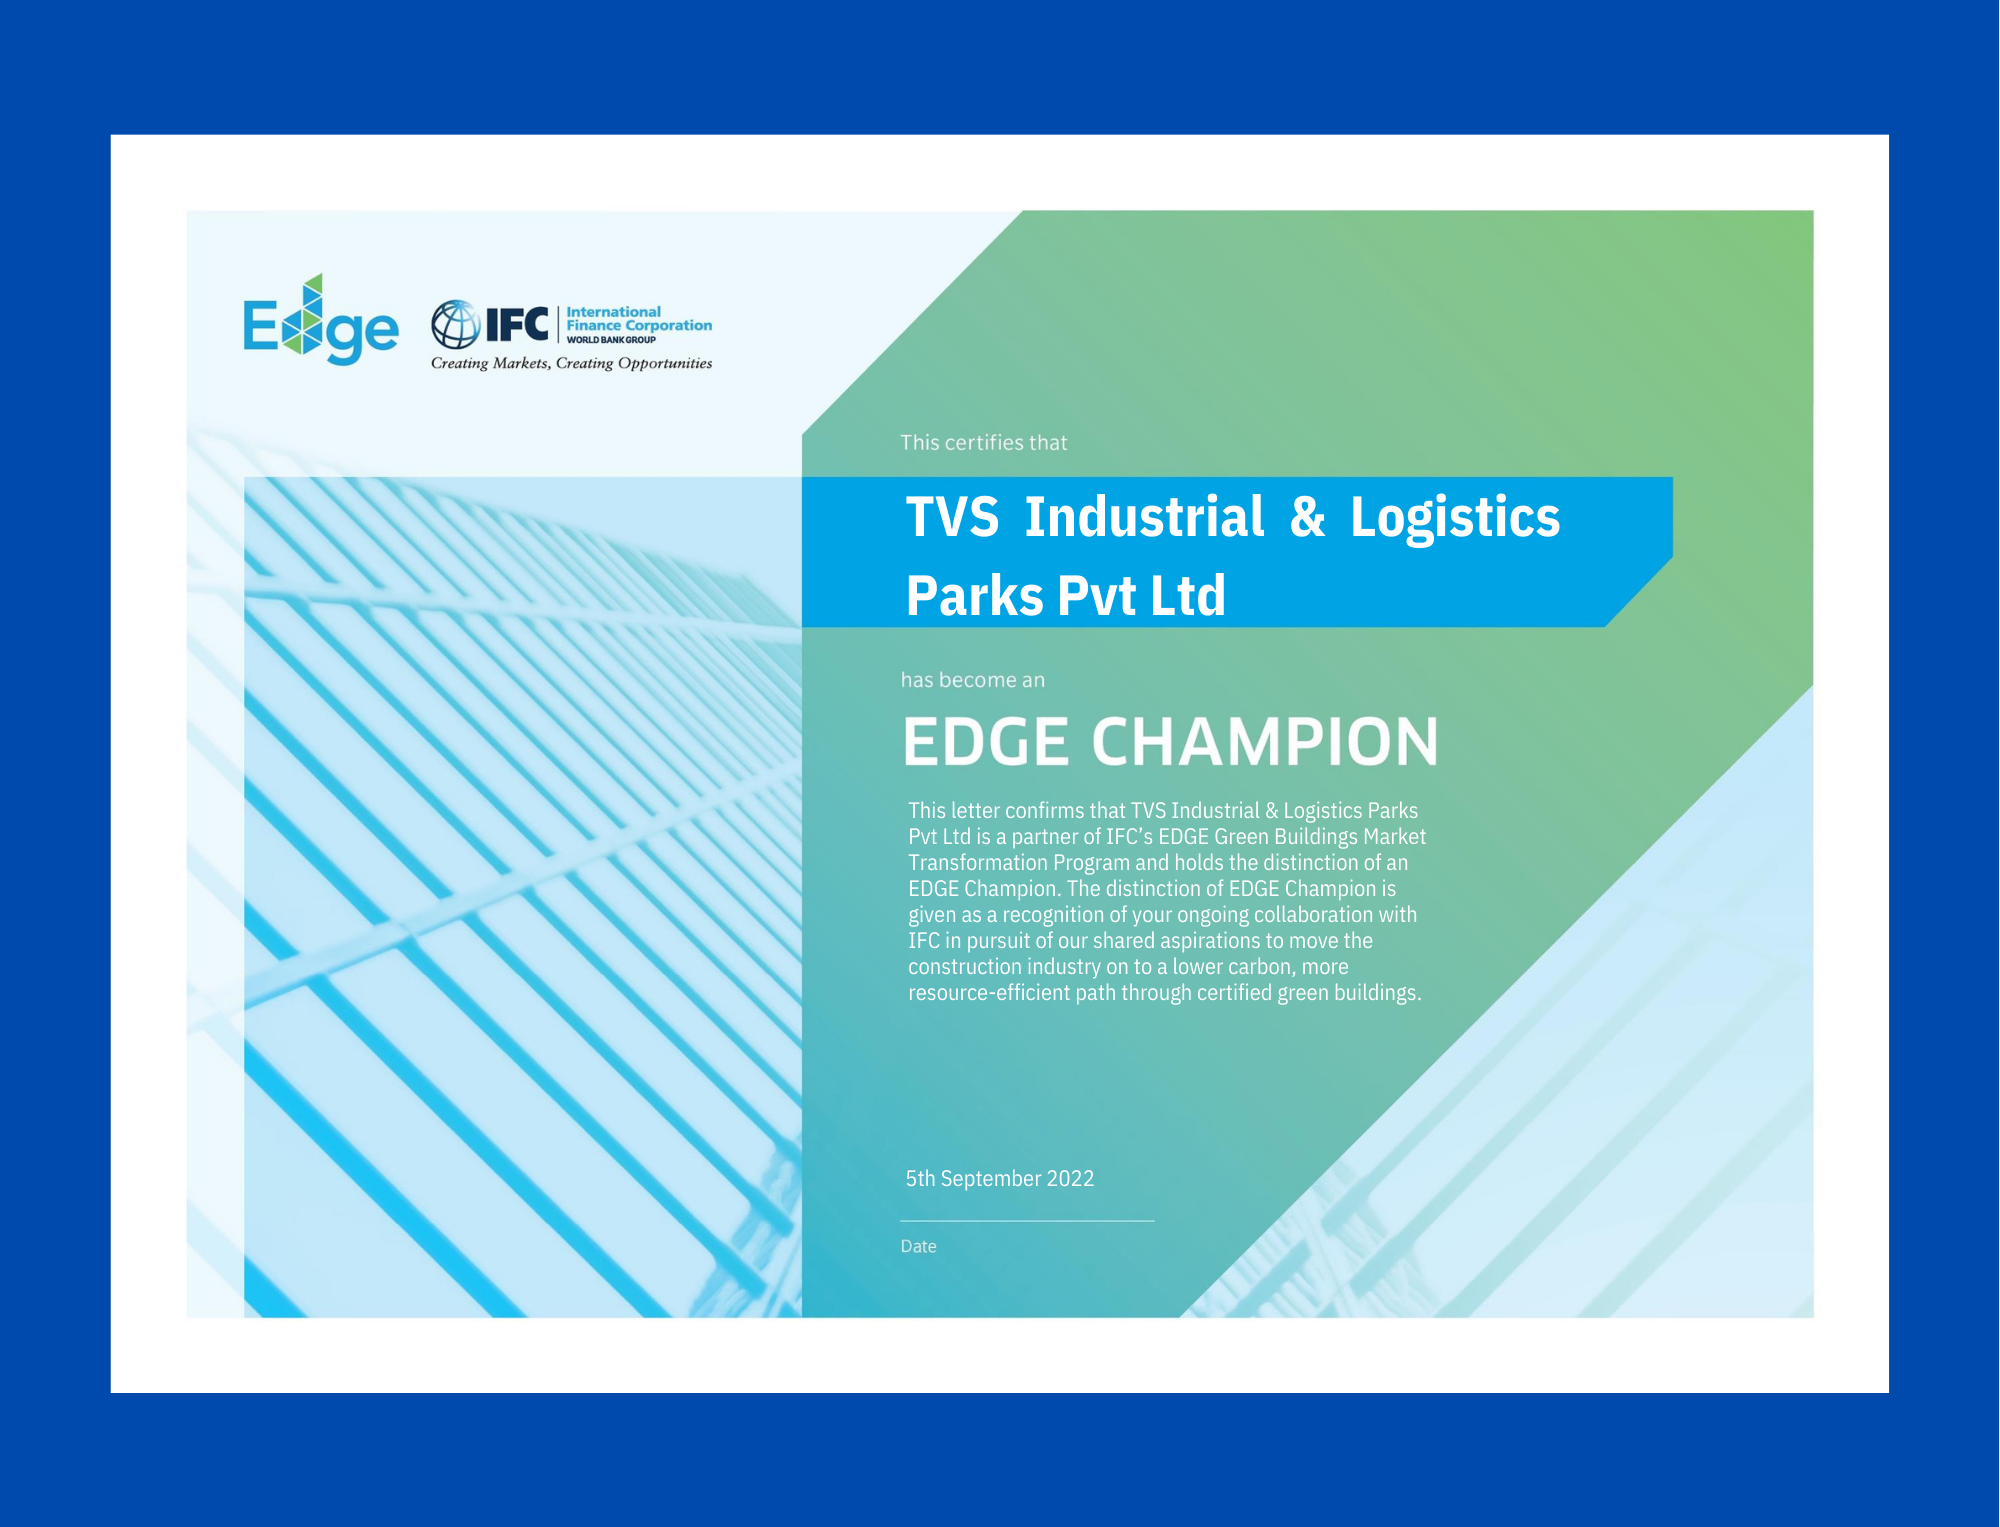 (TVS ILP) is the first warehousing company to bag the EDGE advance certification for 13 industrial warehouse buildings